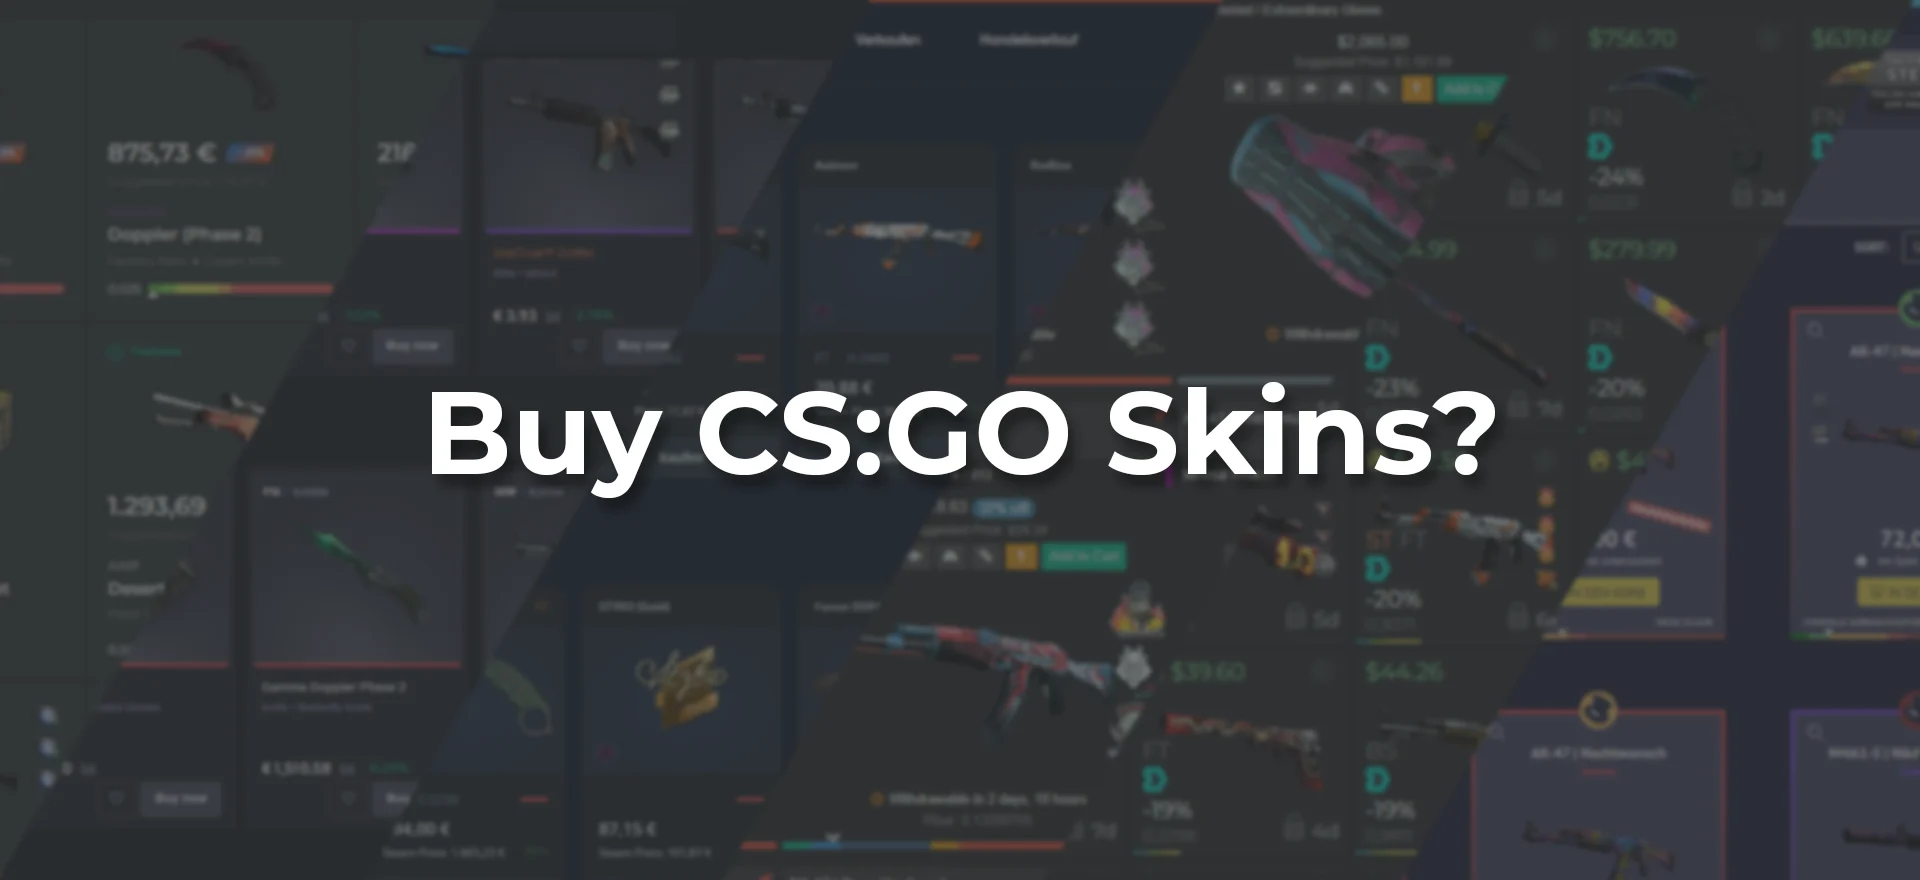 Looking to Buy CSGO Skins? Don't Spend Money on Avoidable Fees!